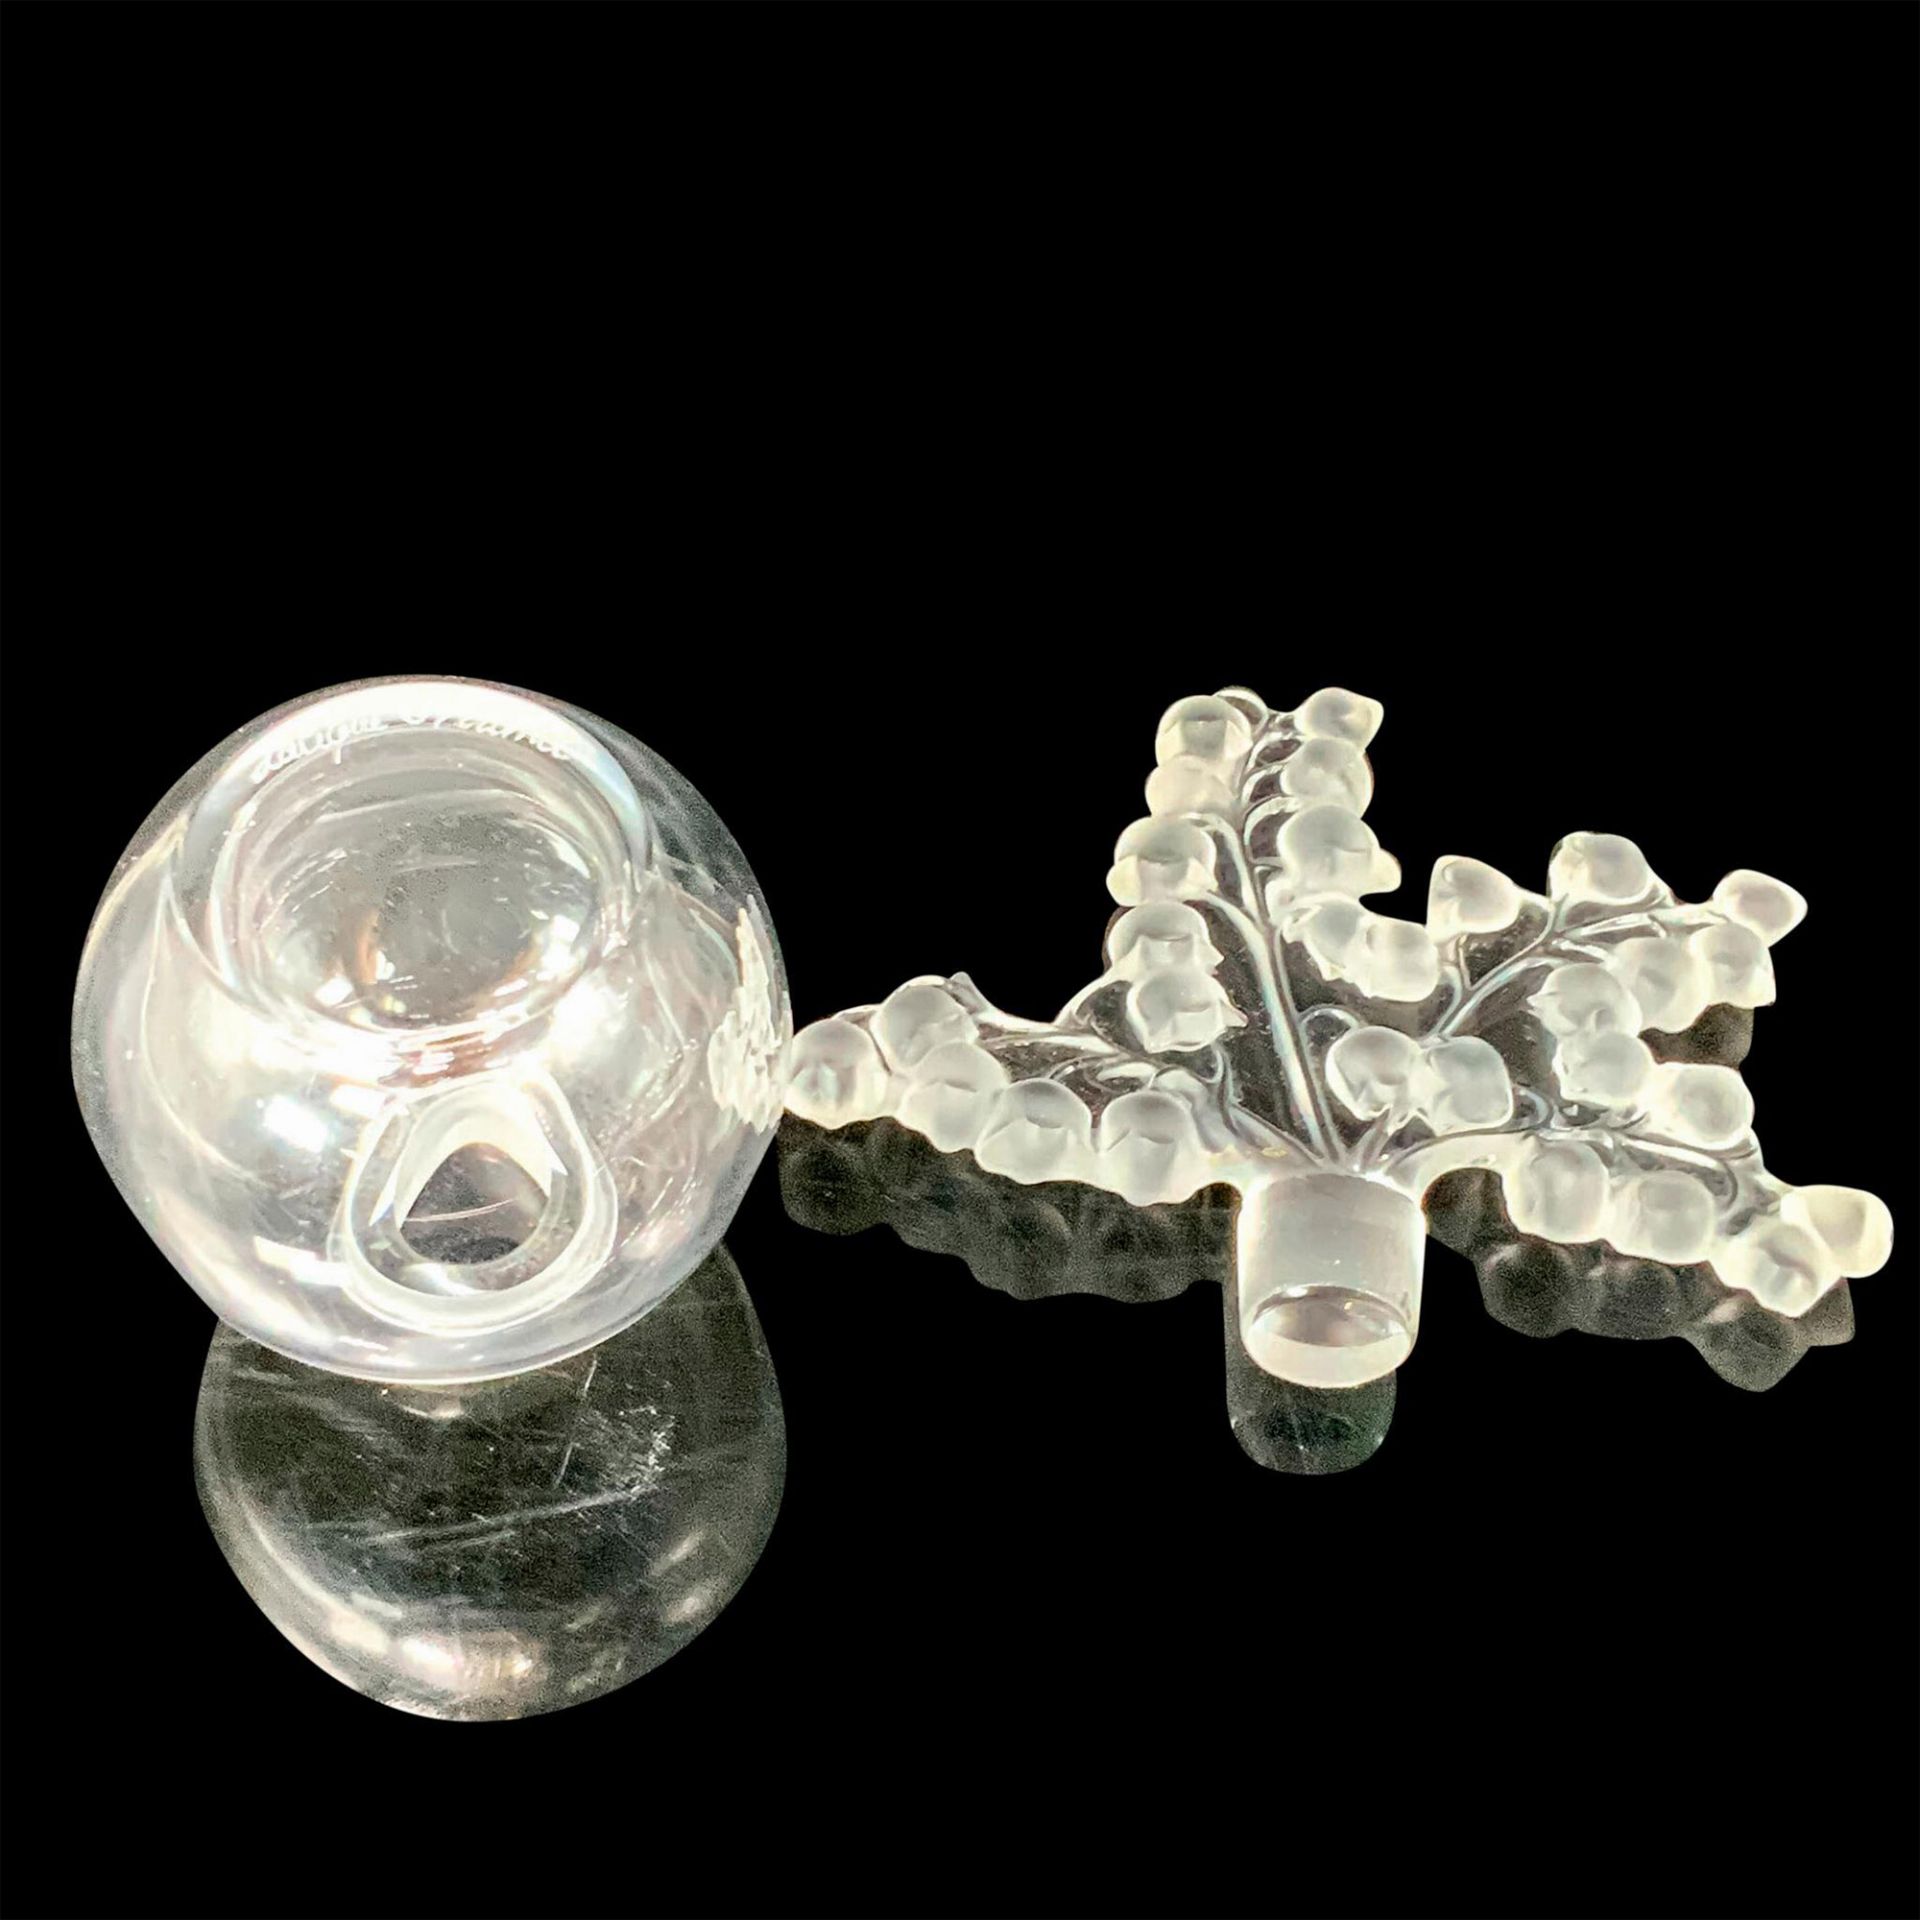 Lalique Clairefontaine Perfume Bottle and Stopper - Image 3 of 3